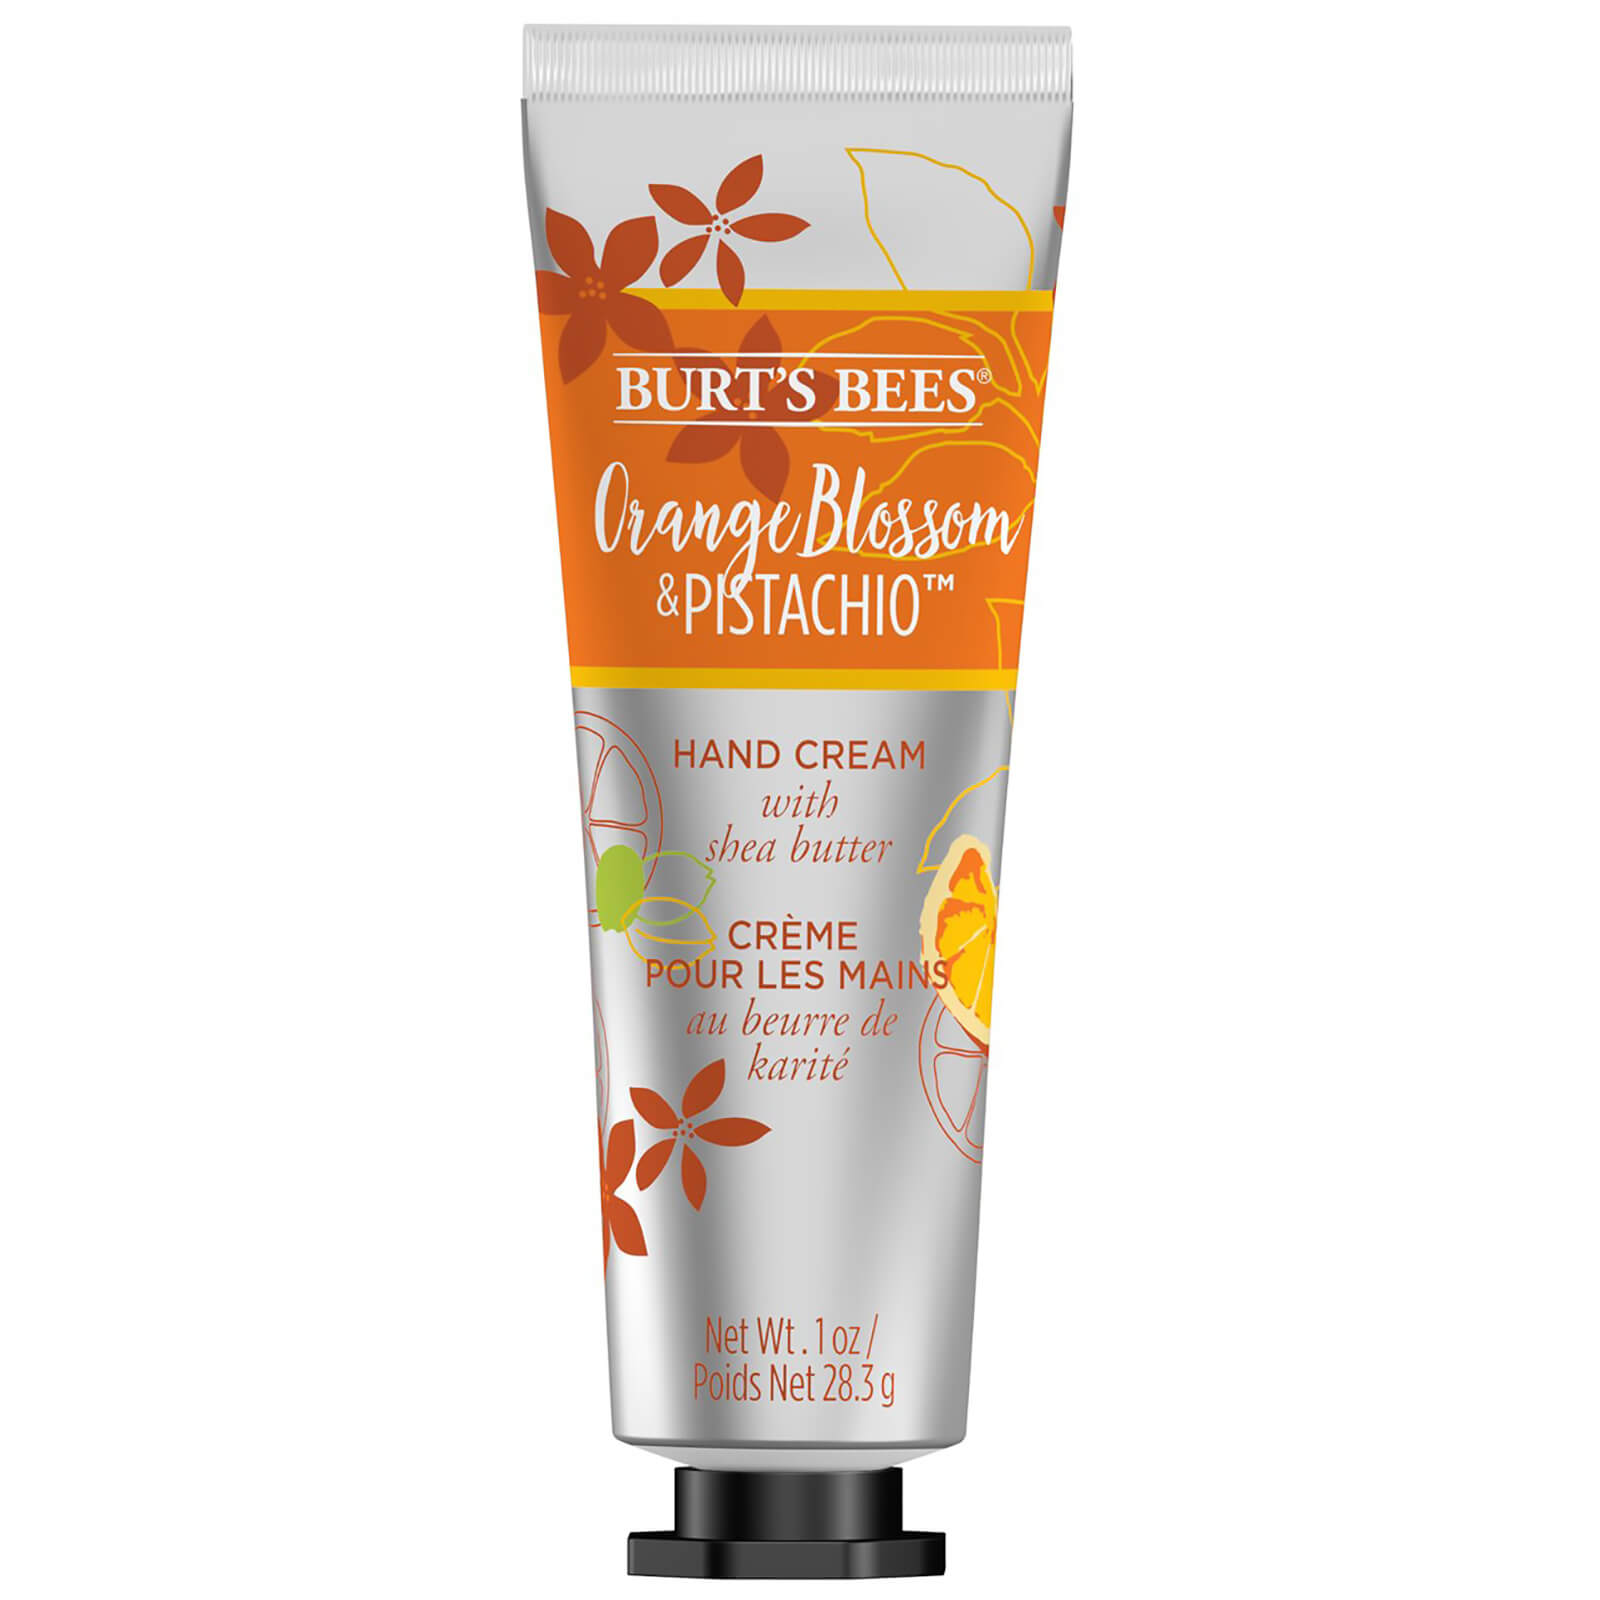 Image of Burt's Bees Hand Cream with Shea Butter, Orange Blossom and Pistachio 28.3g